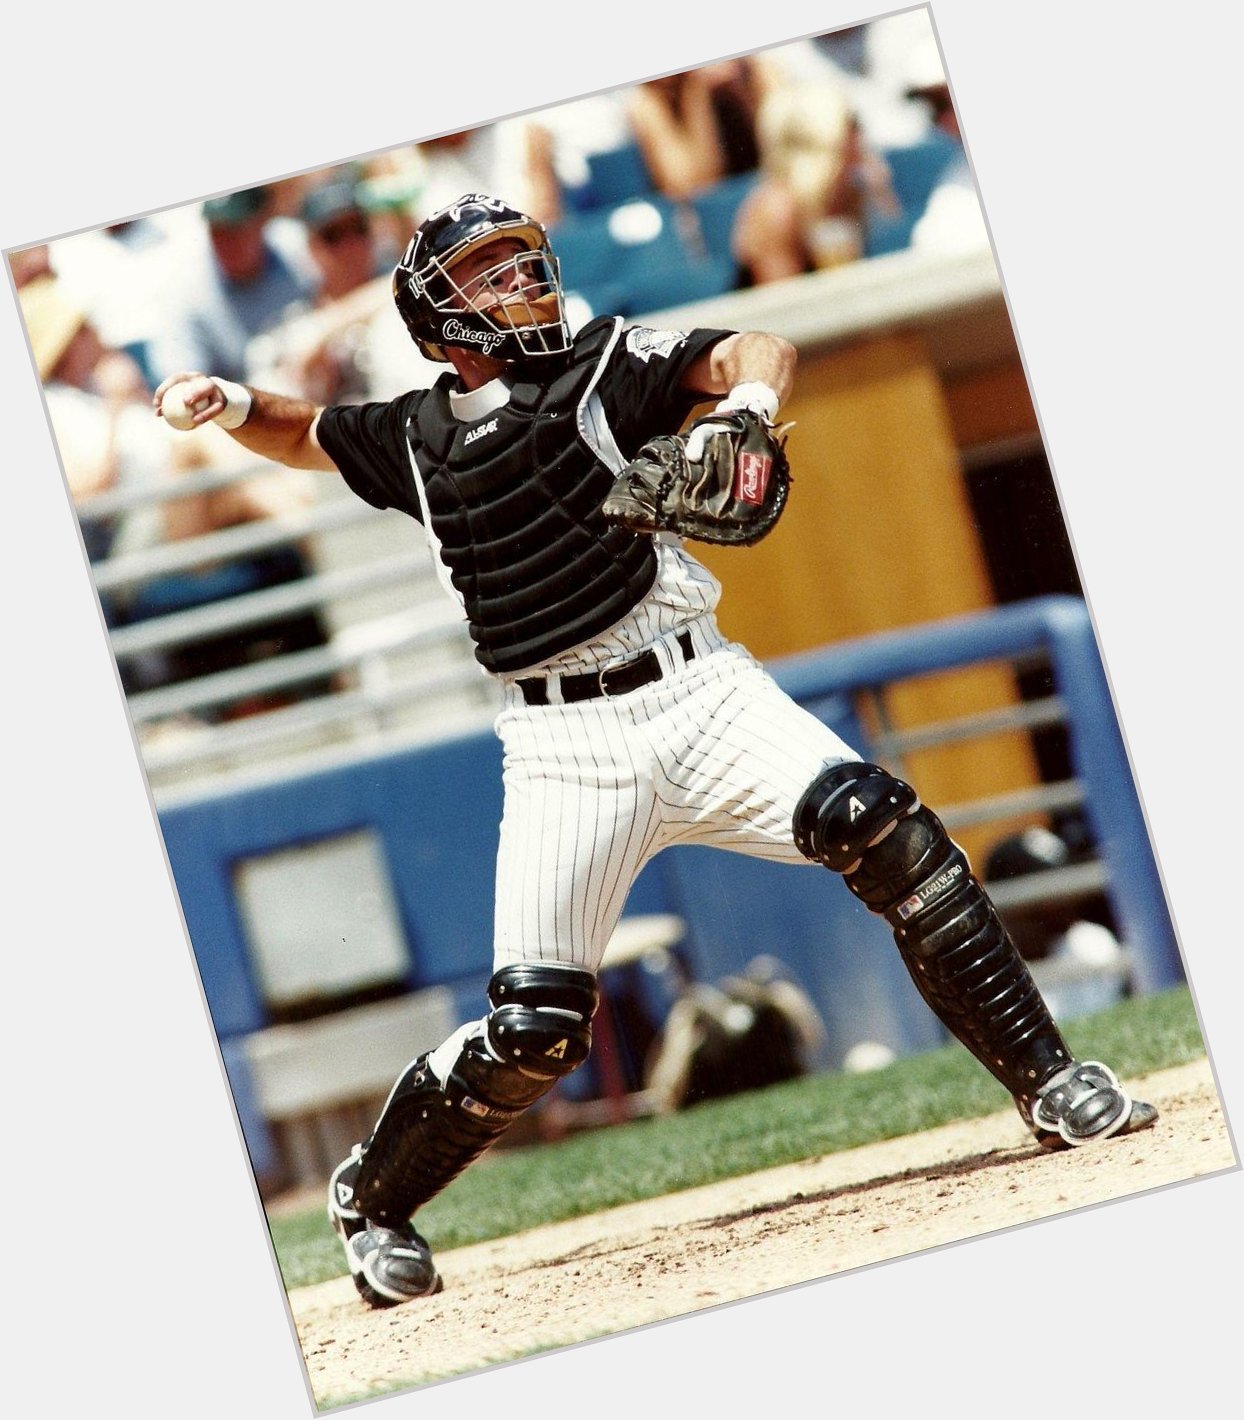 Happy 40th Birthday to former Mark Johnson! A catcher 1998-2002, he played in 302 G with 1036 PA & 879 AB 